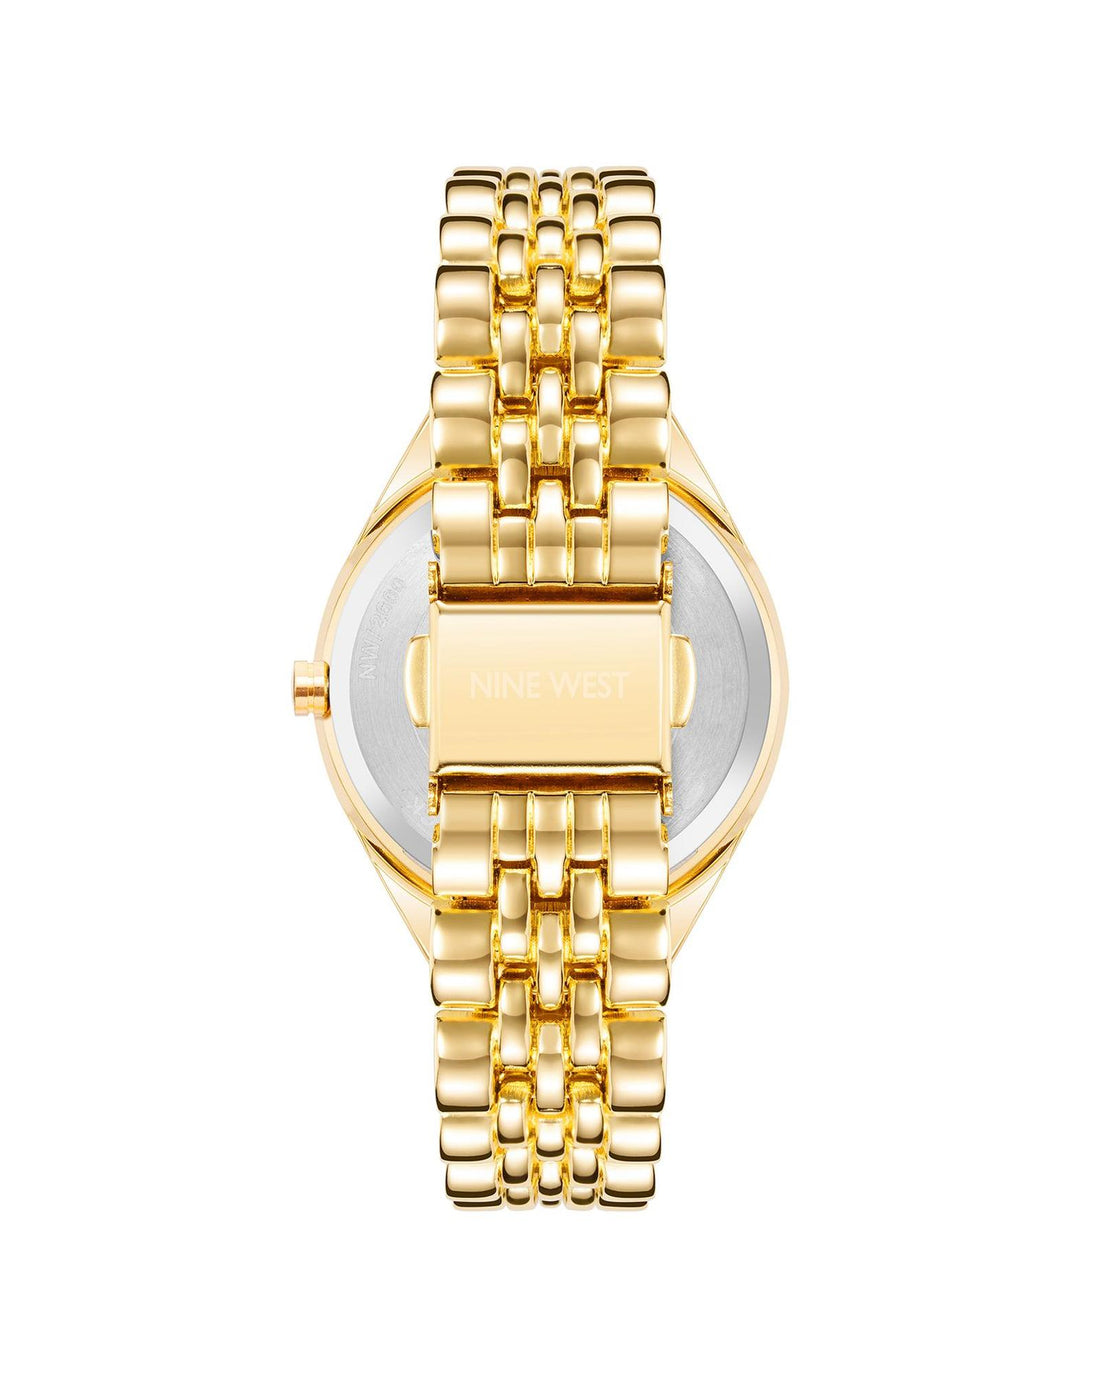 Gold Fashion Watch with Analog Display and Day/Date Functions One Size Women-Women&